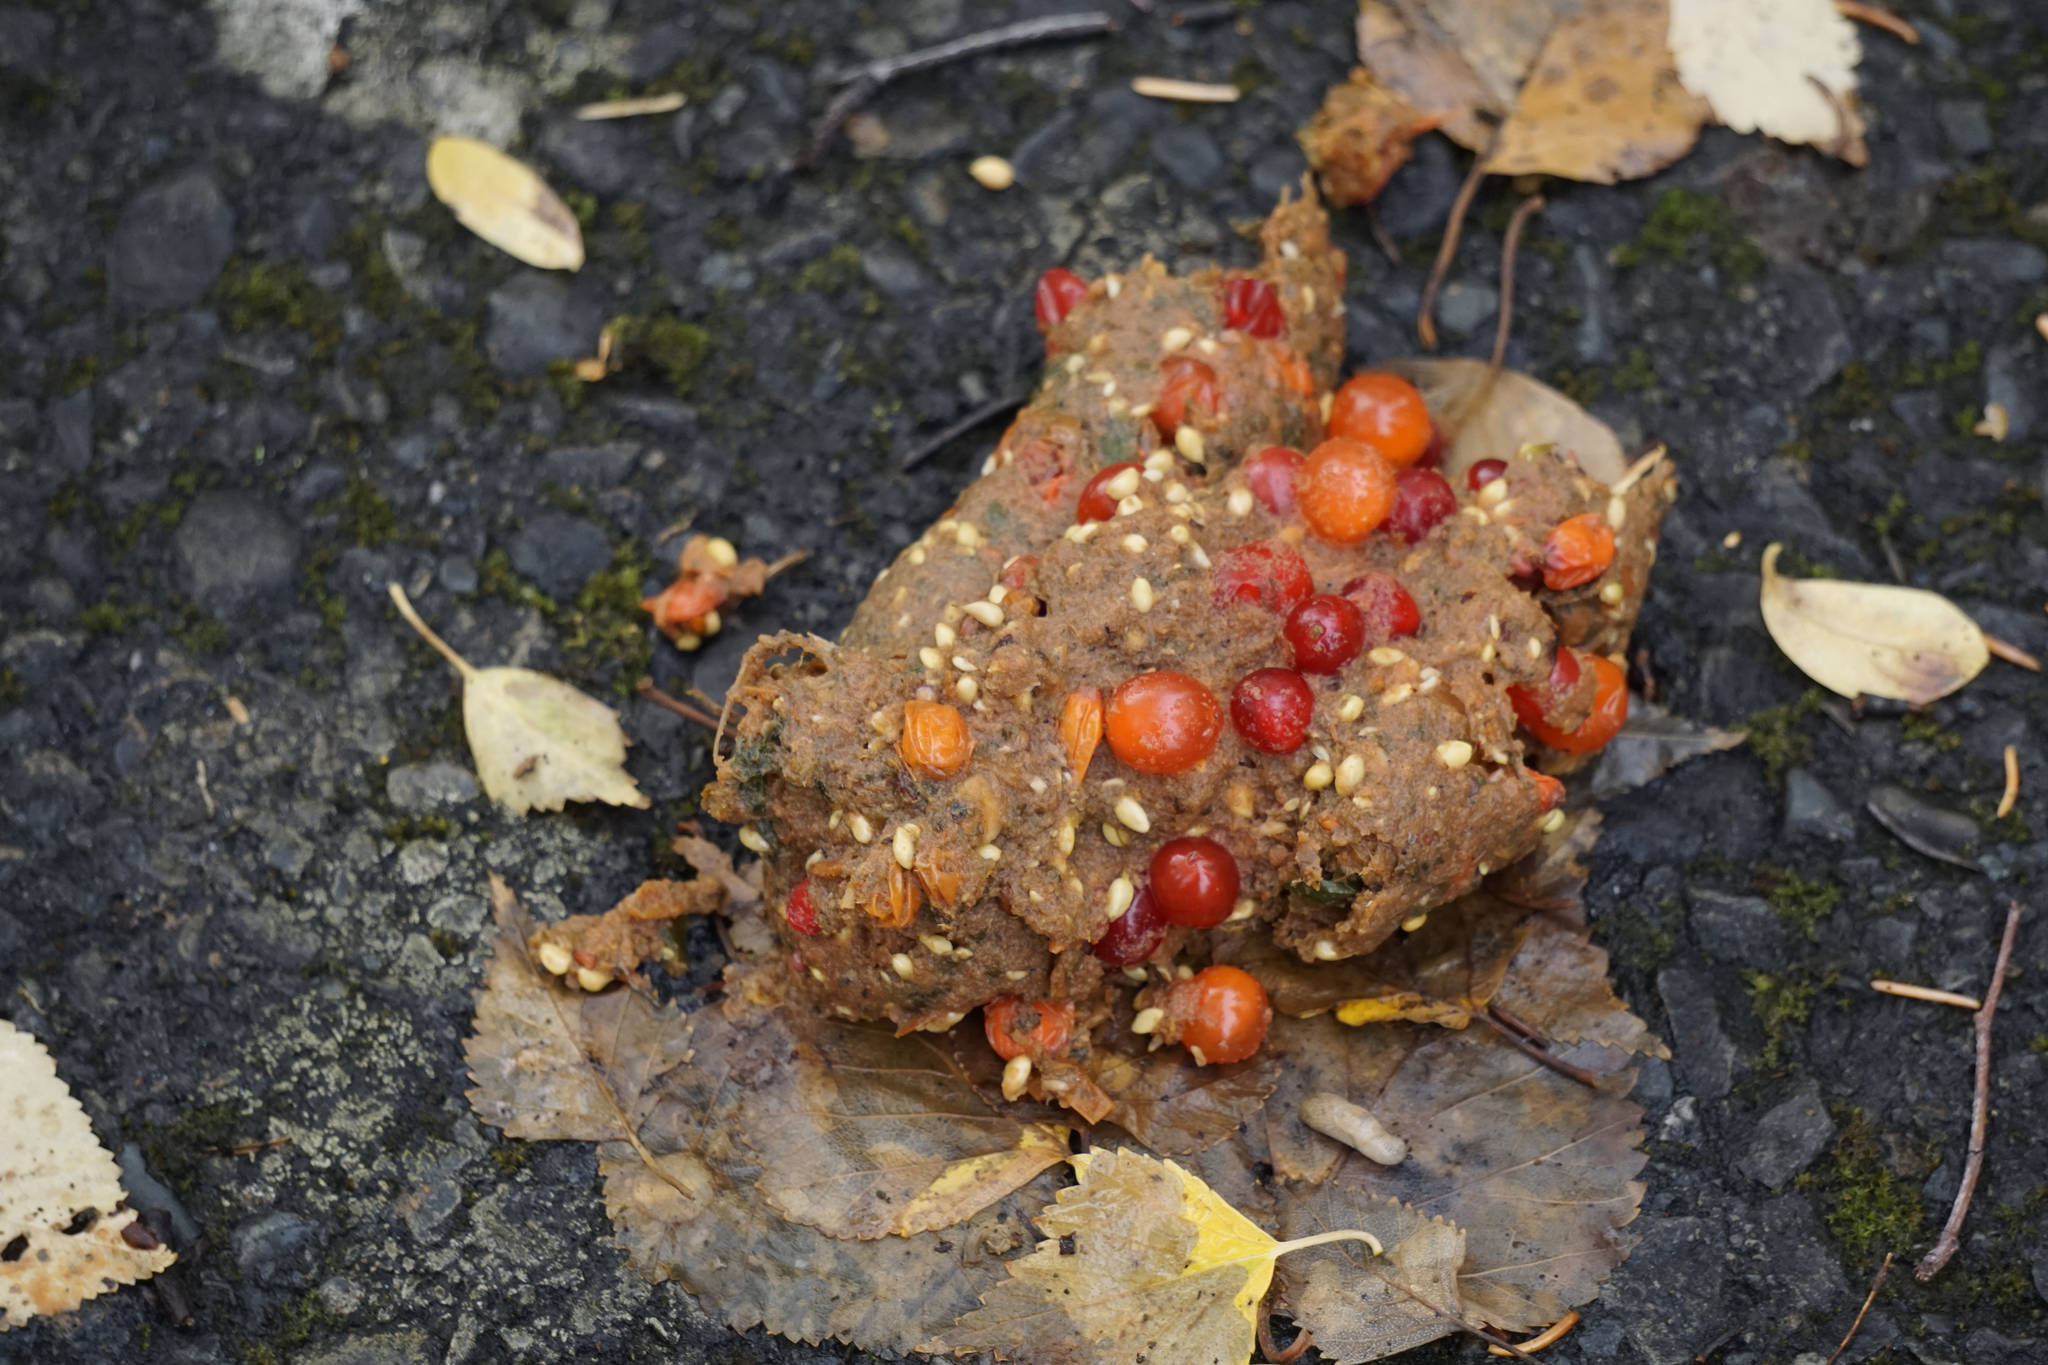 Bear poop with berries and seeds is in a trail near Hidden Lake in the Kenai National Wildlife Refuge on Saturday, Sept. 29, 2018, near Sterling, Alaska. (Photo by Michael Armstrong/Homer News)